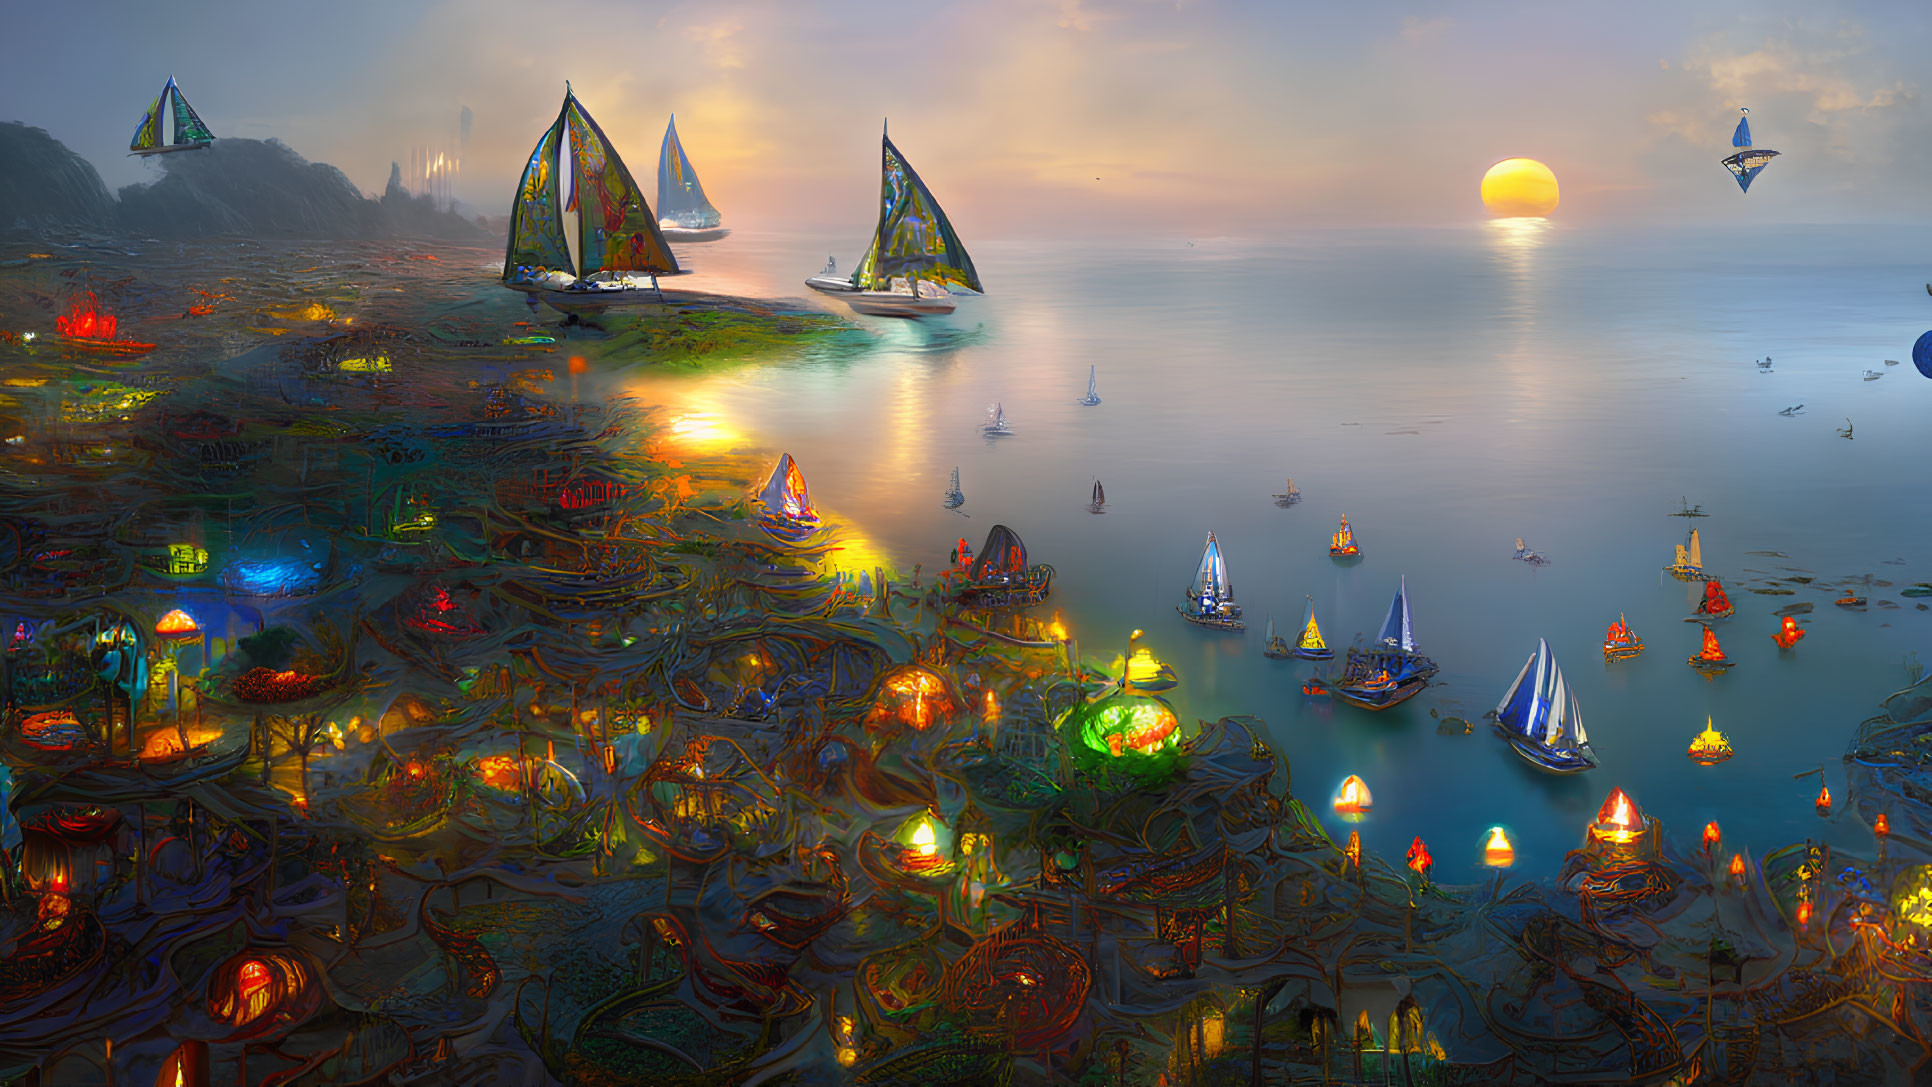 Fantastical sunset seascape with ornate boats and colorful structures